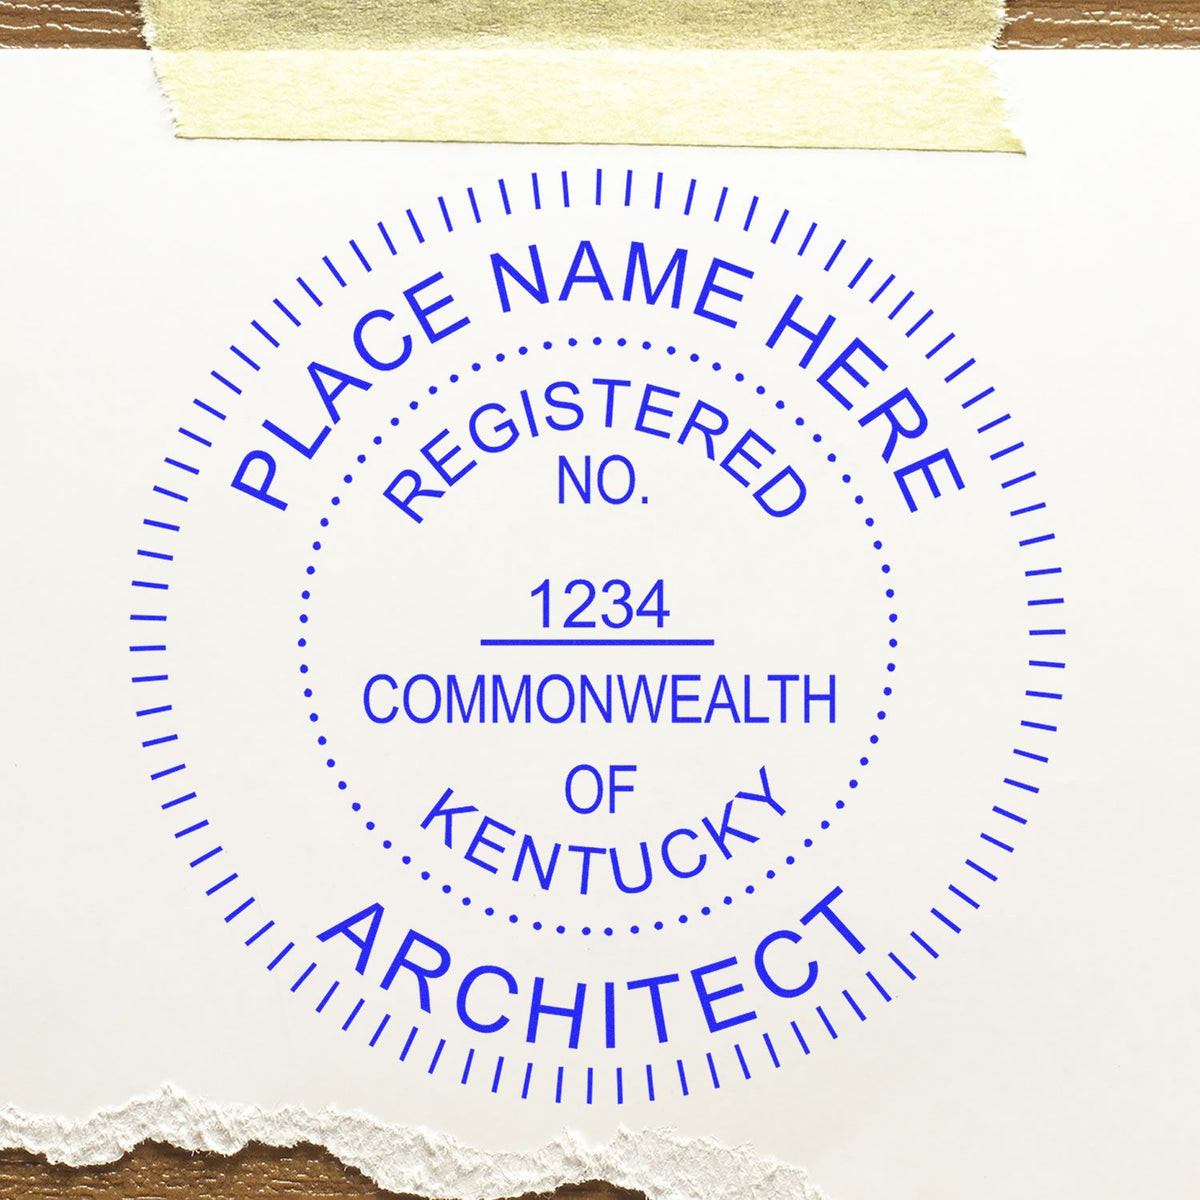 Slim Pre-Inked Kentucky Architect Seal Stamp in use photo showing a stamped imprint of the Slim Pre-Inked Kentucky Architect Seal Stamp